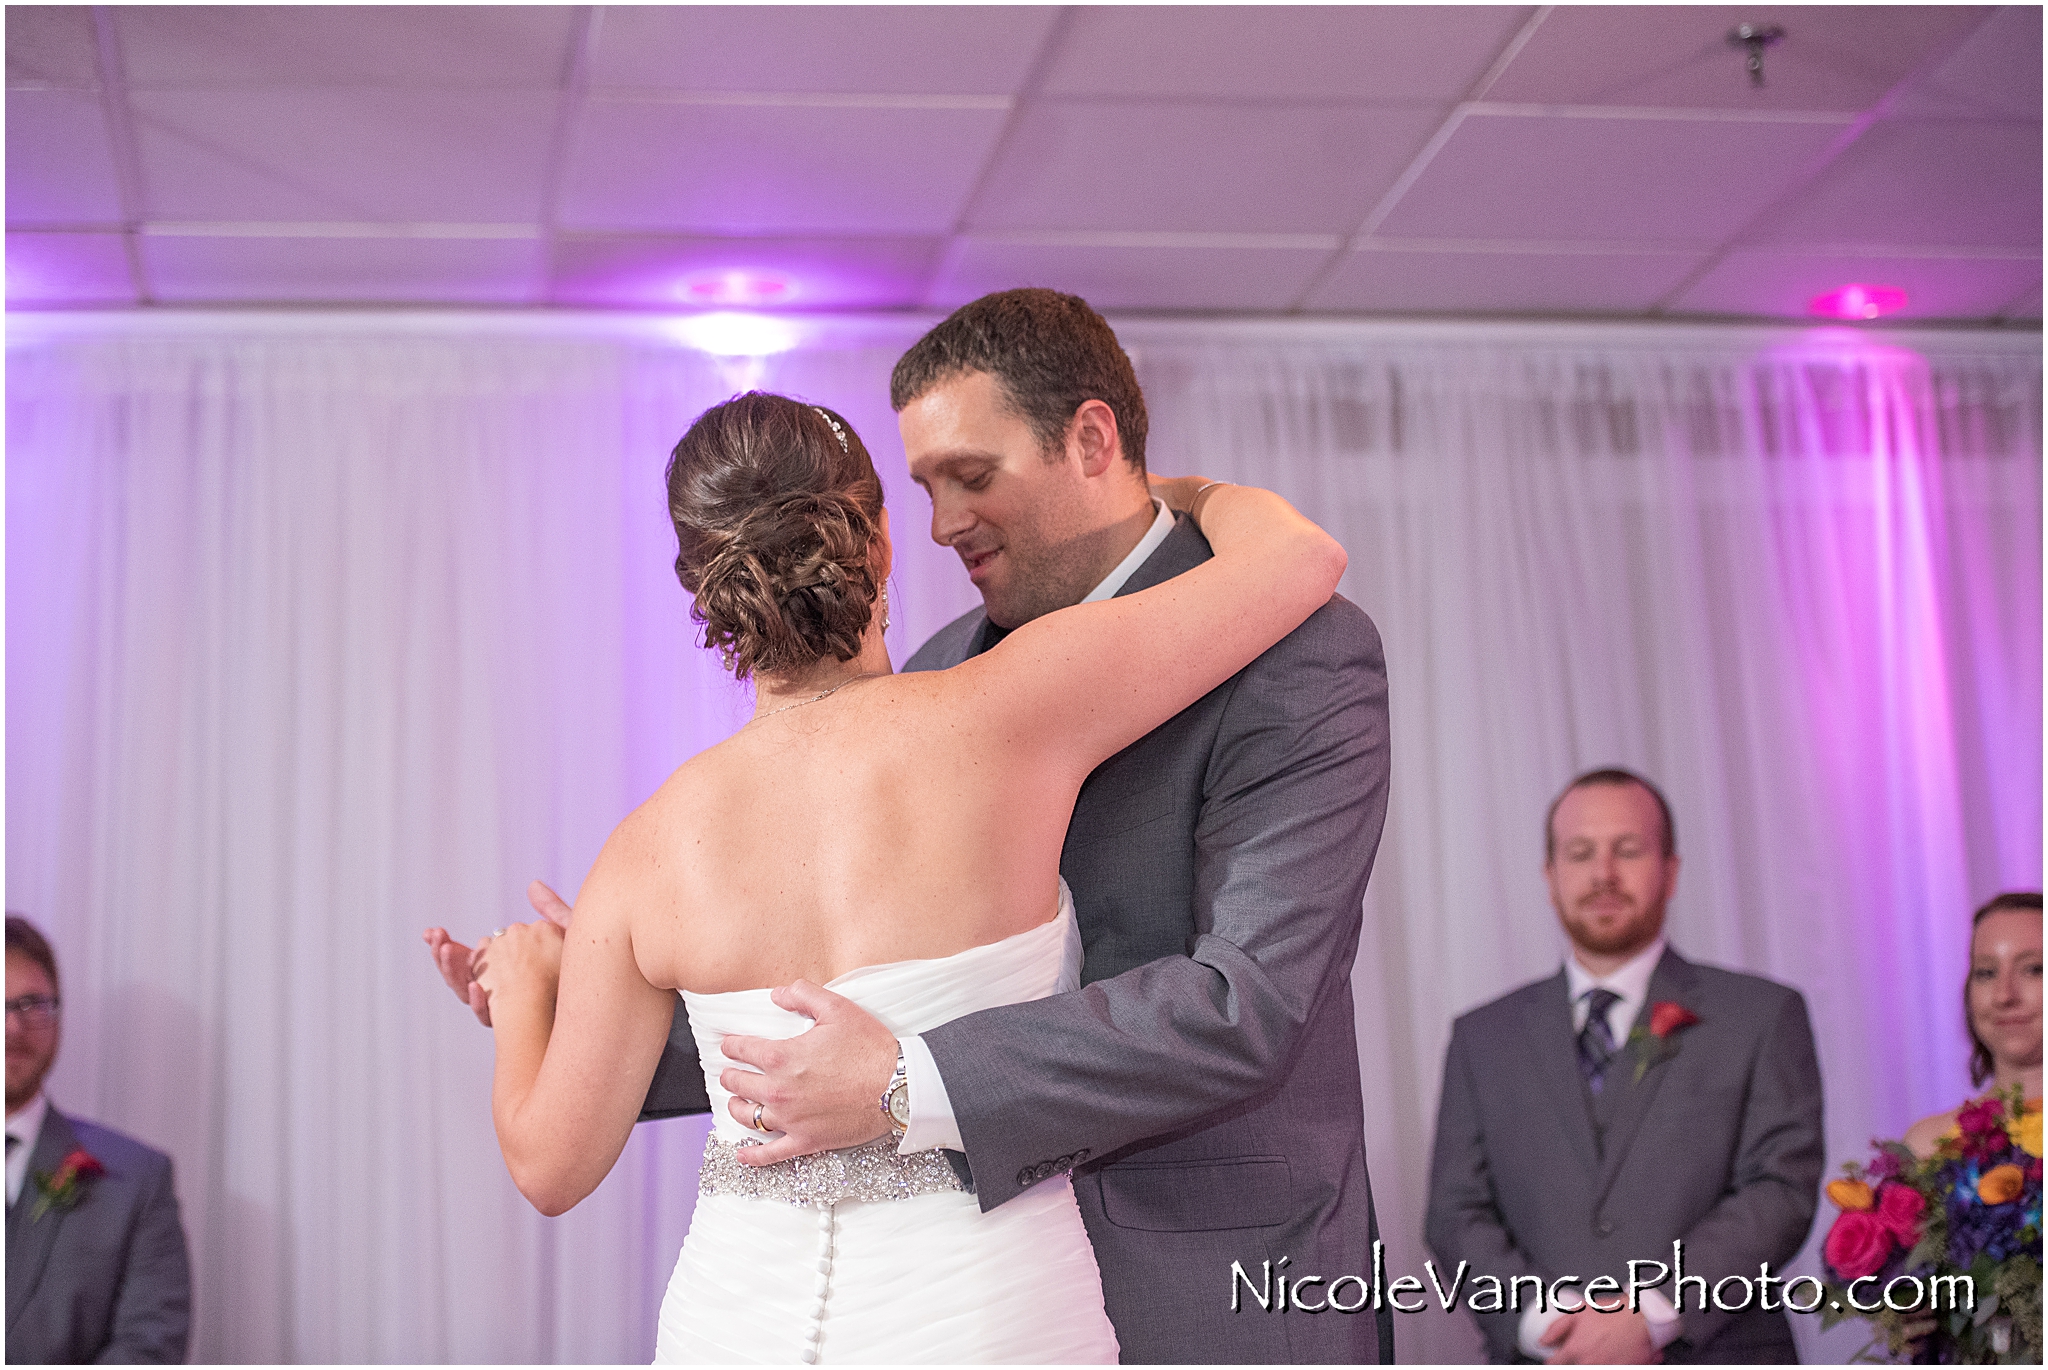 The bride and groom enjoy their first dance at their wedding reception at The Brownstone.